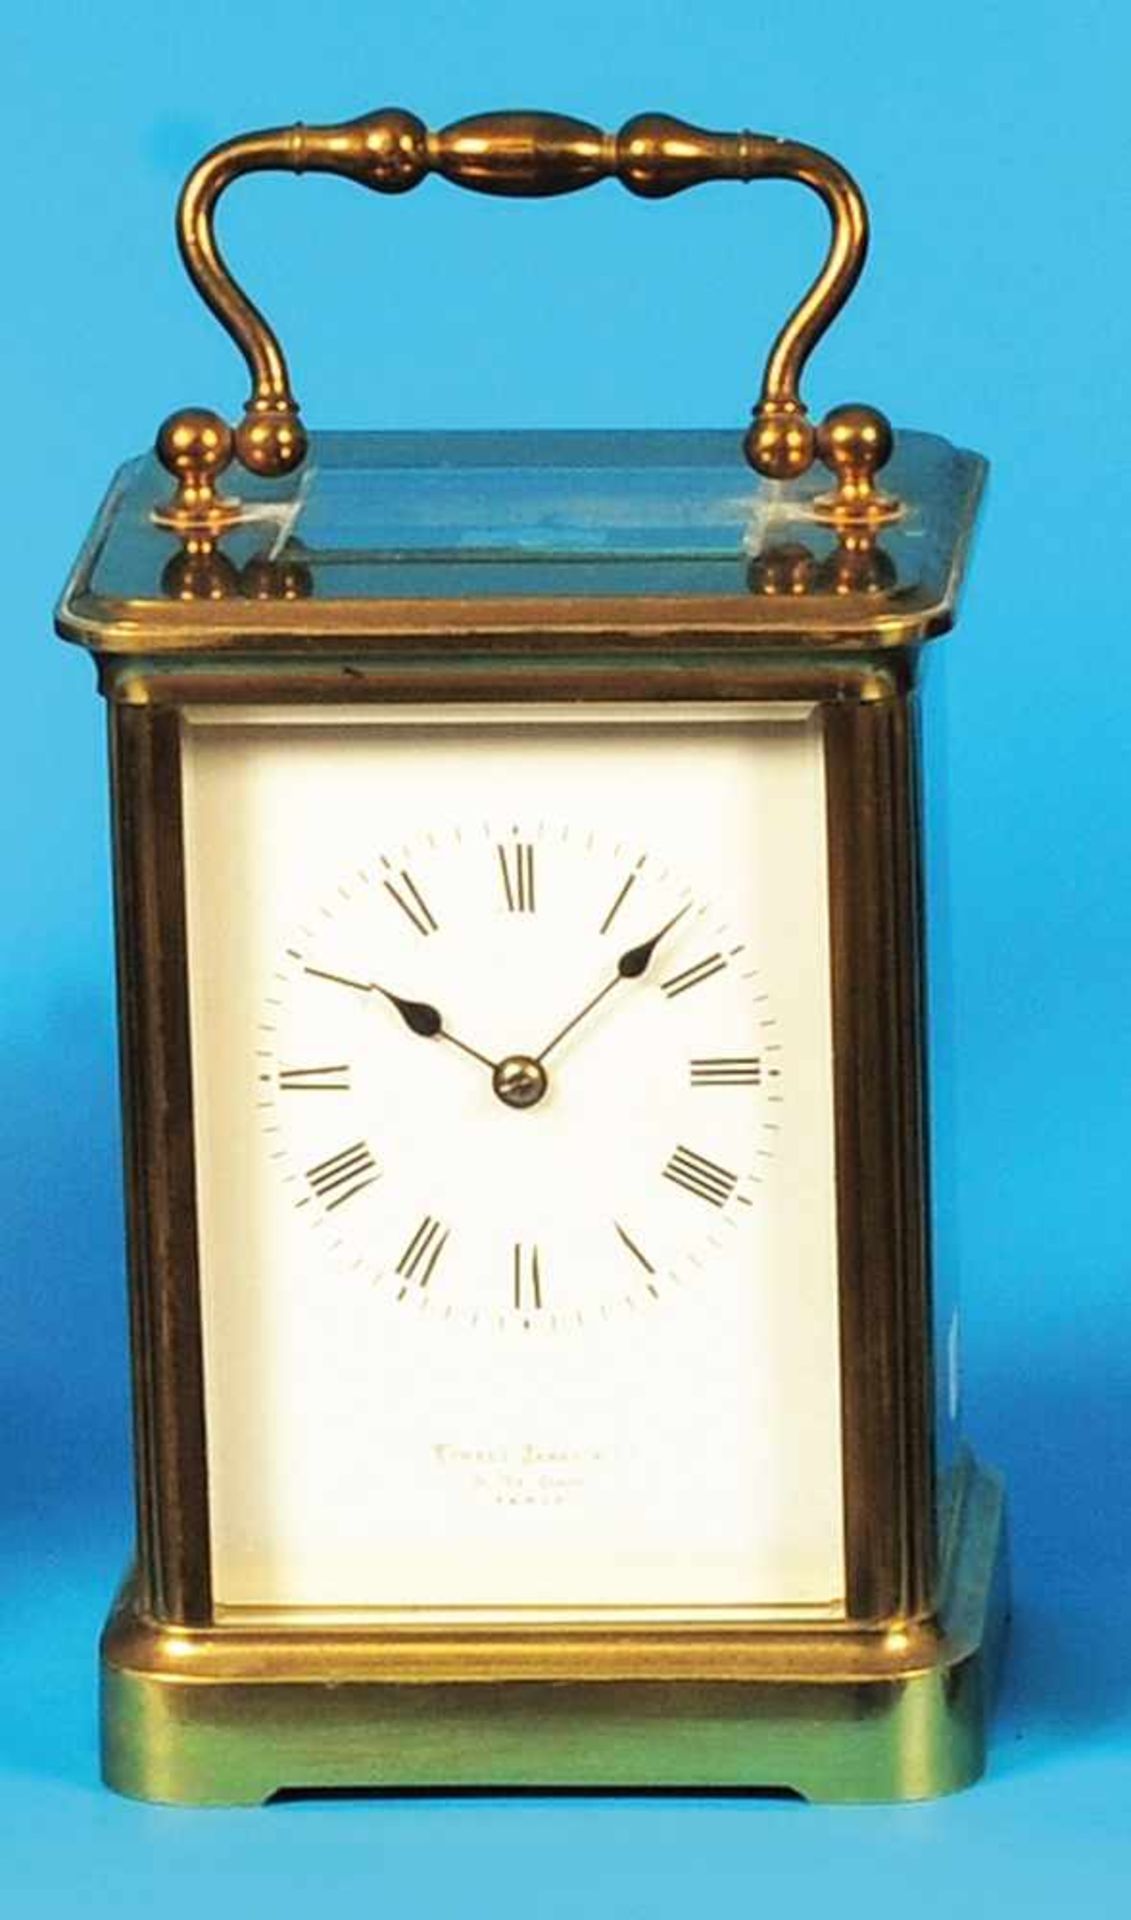 Allround glassed travel clock with 17"-hour-strike on bell, signed Howell James & Co. ParisRundum